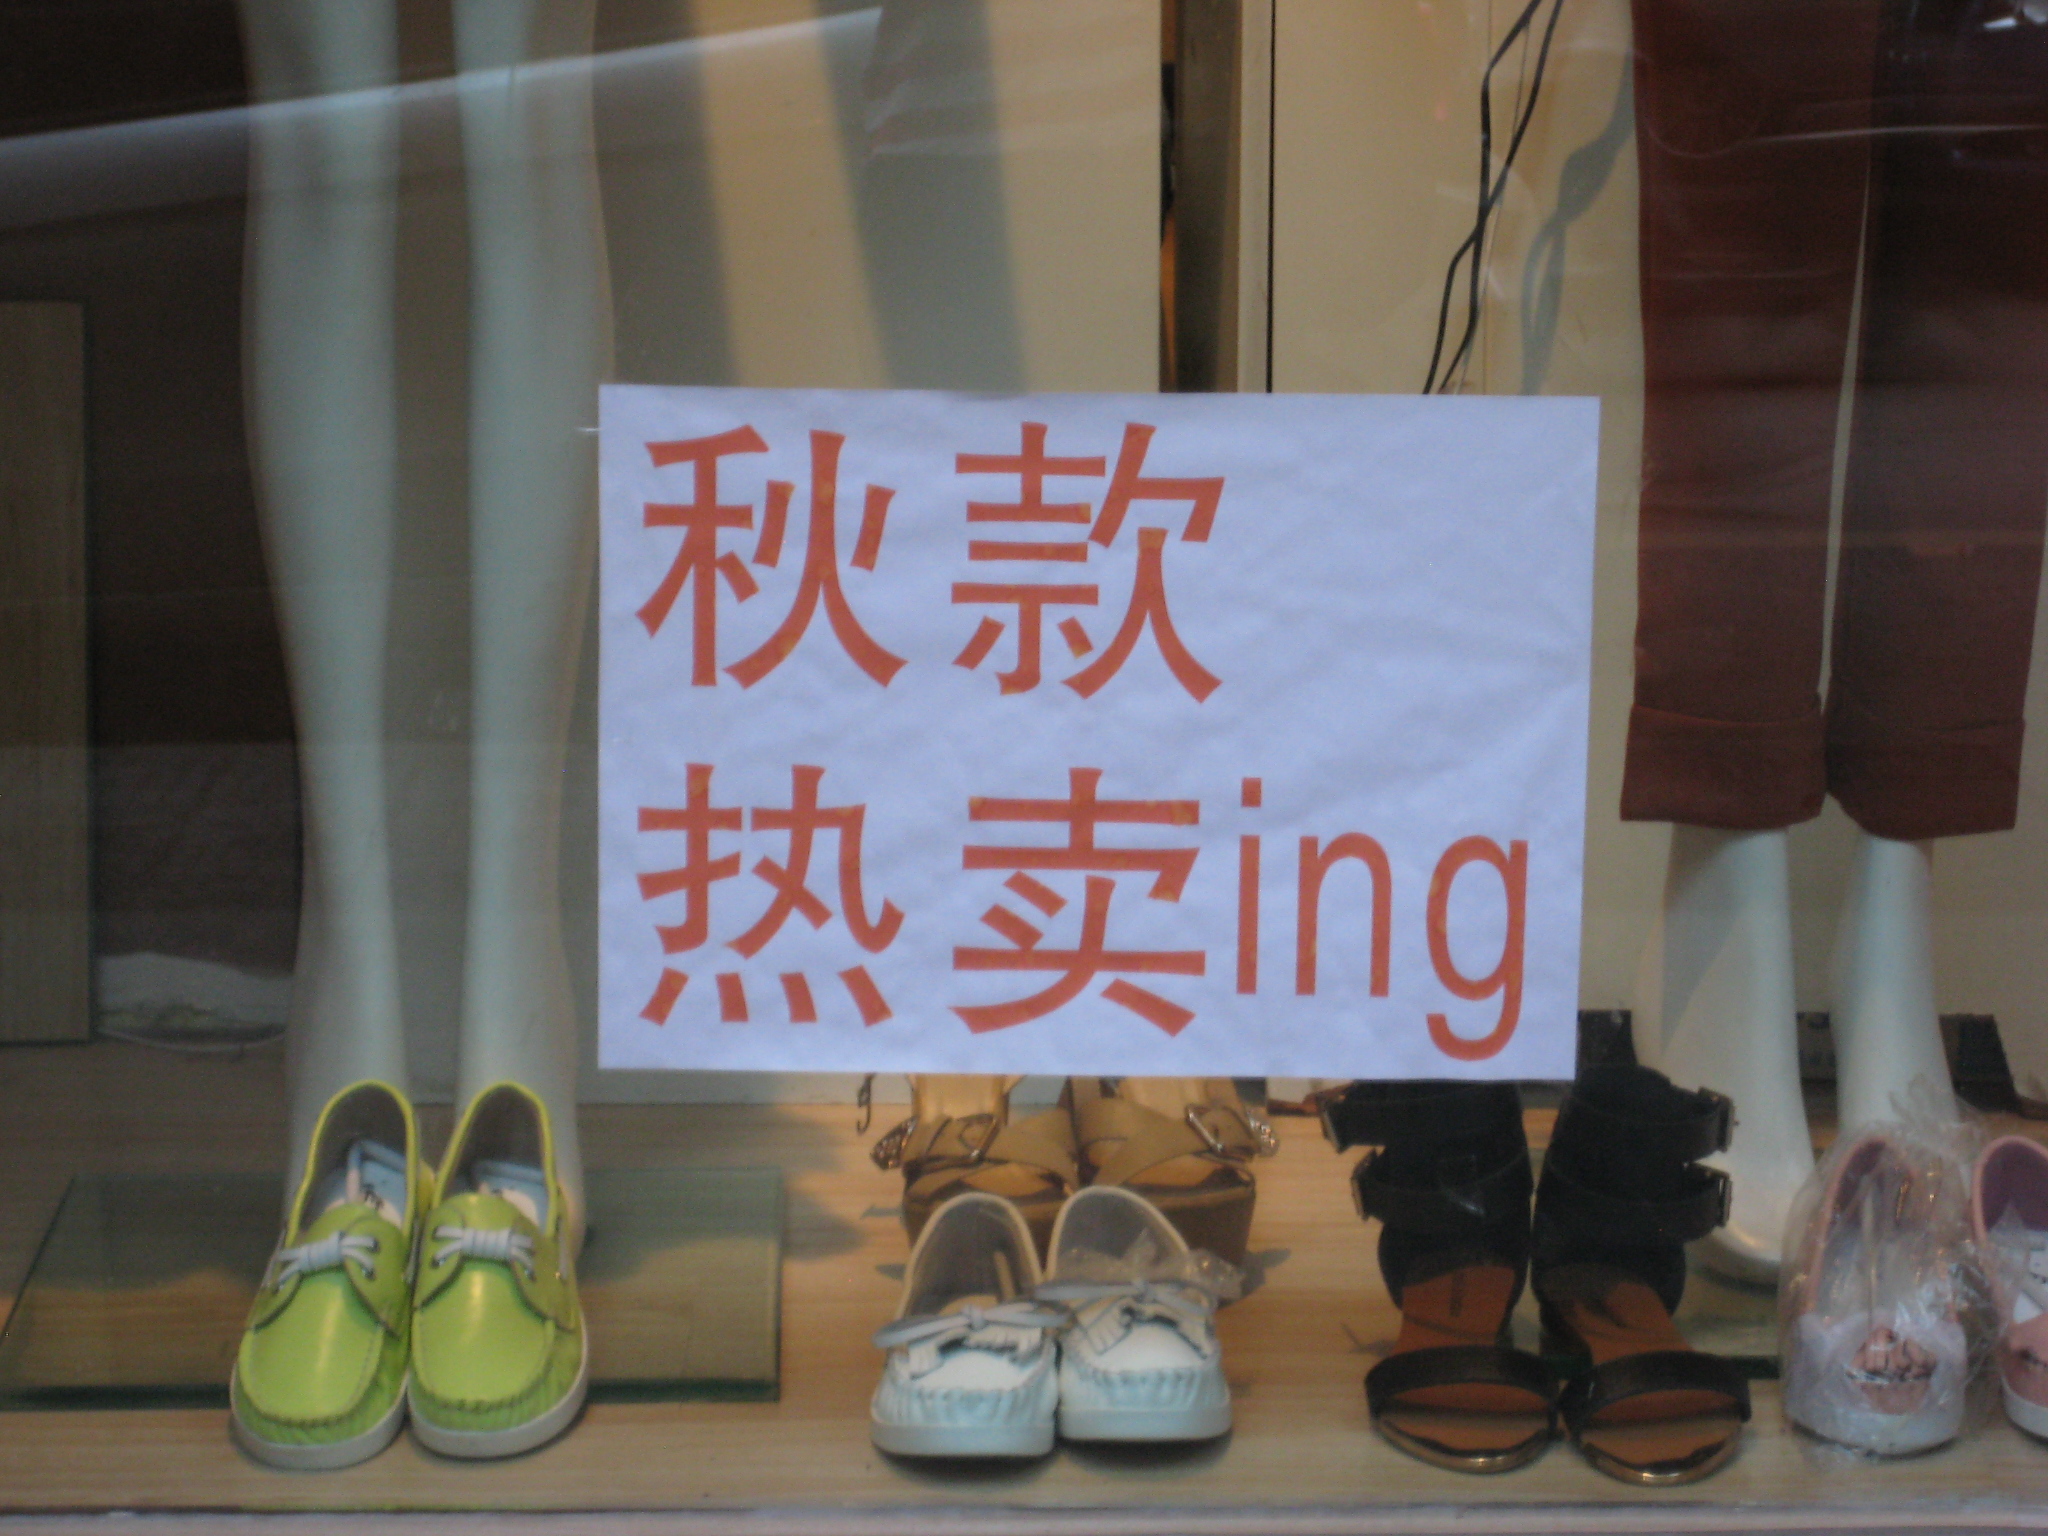 No word for -ing - Chinese